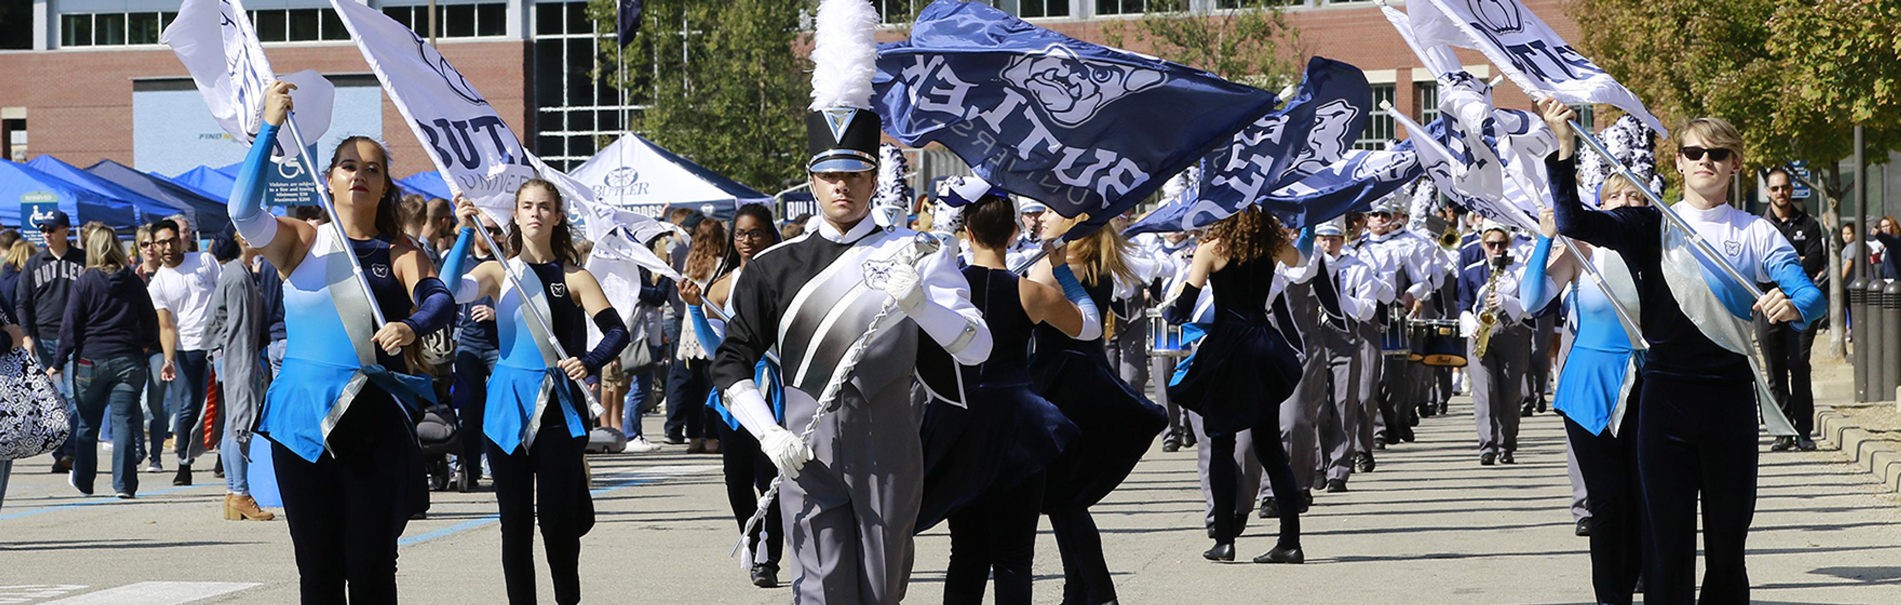 Butler University Marching Band